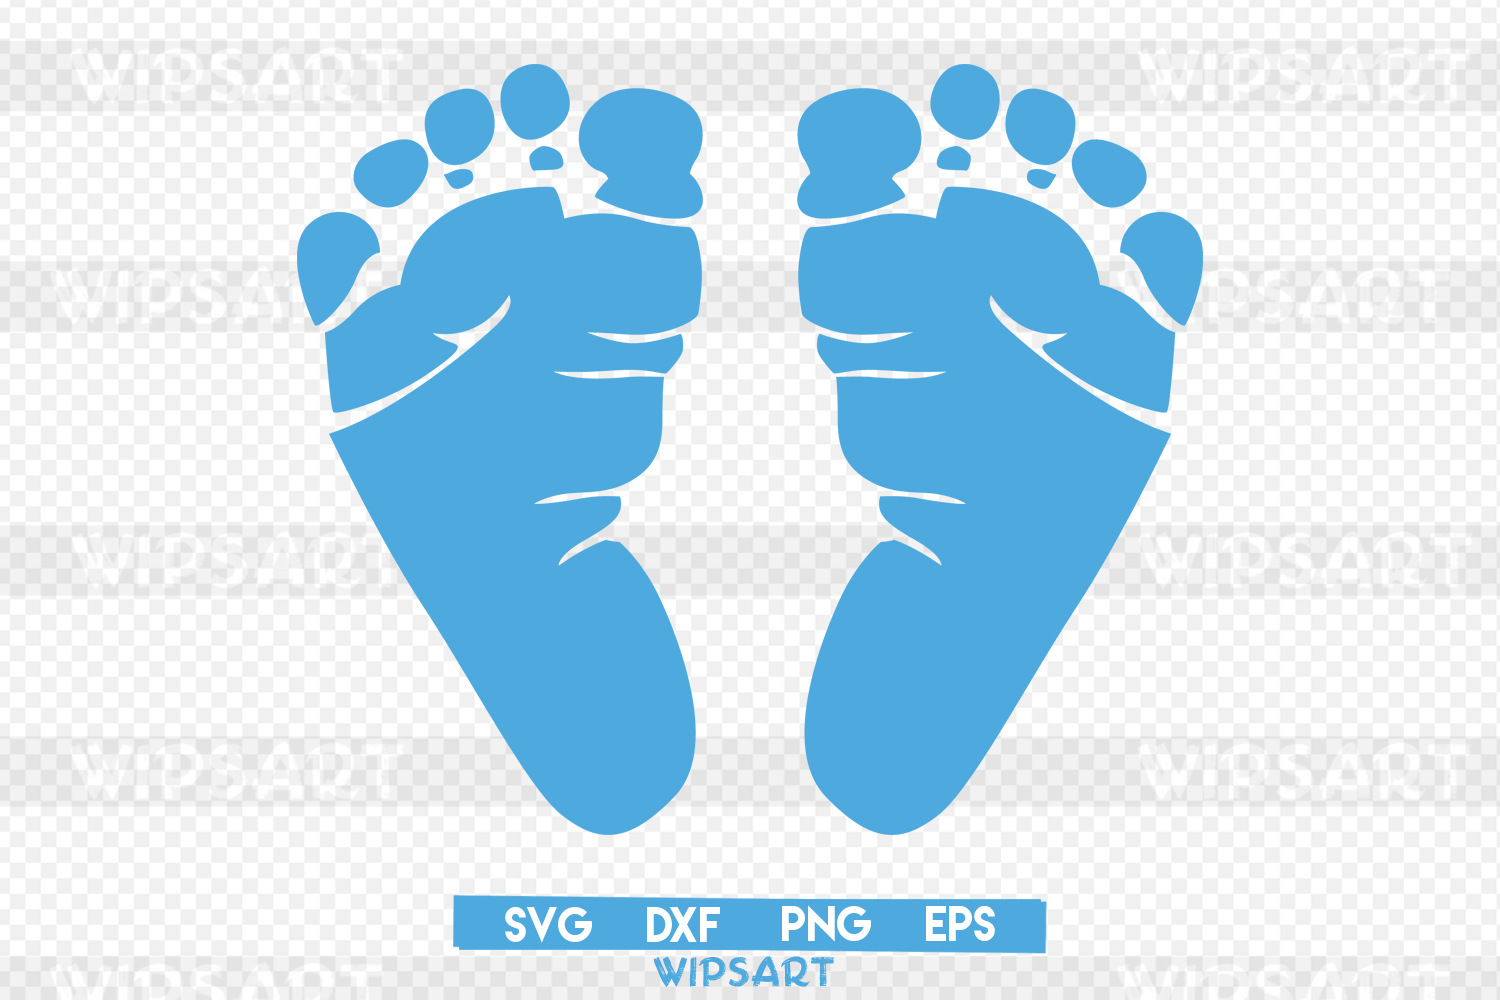 SALE! Baby's first svg file, baby feet silhouette svg